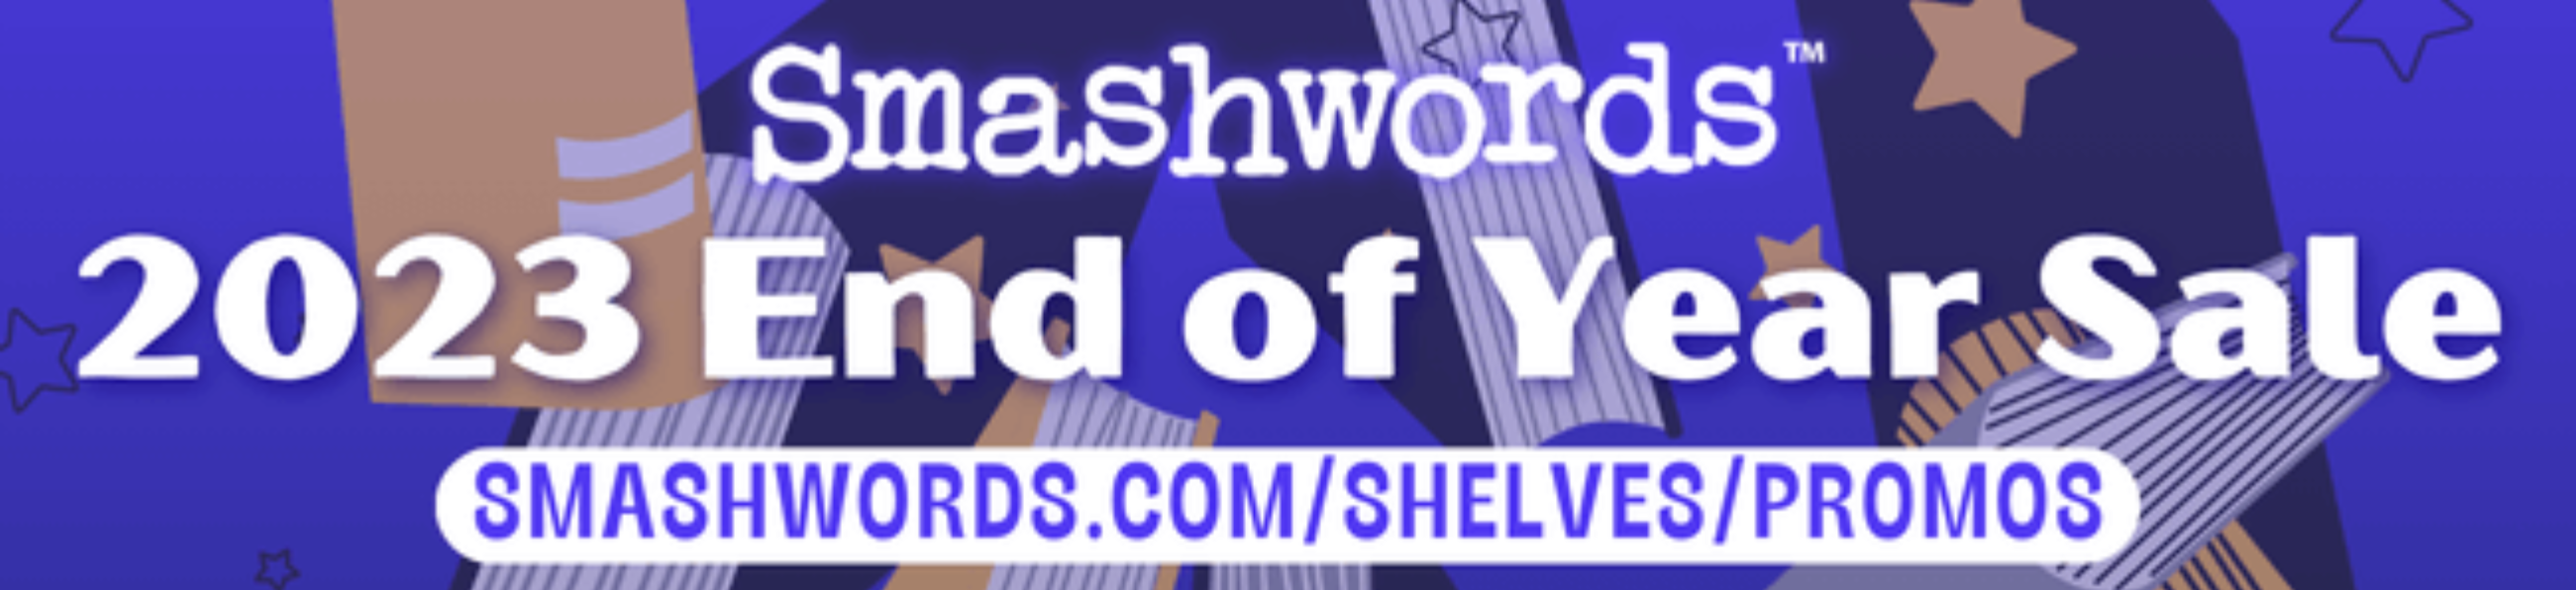 The 2023 Smashwords Summer/Winter Sale is here!